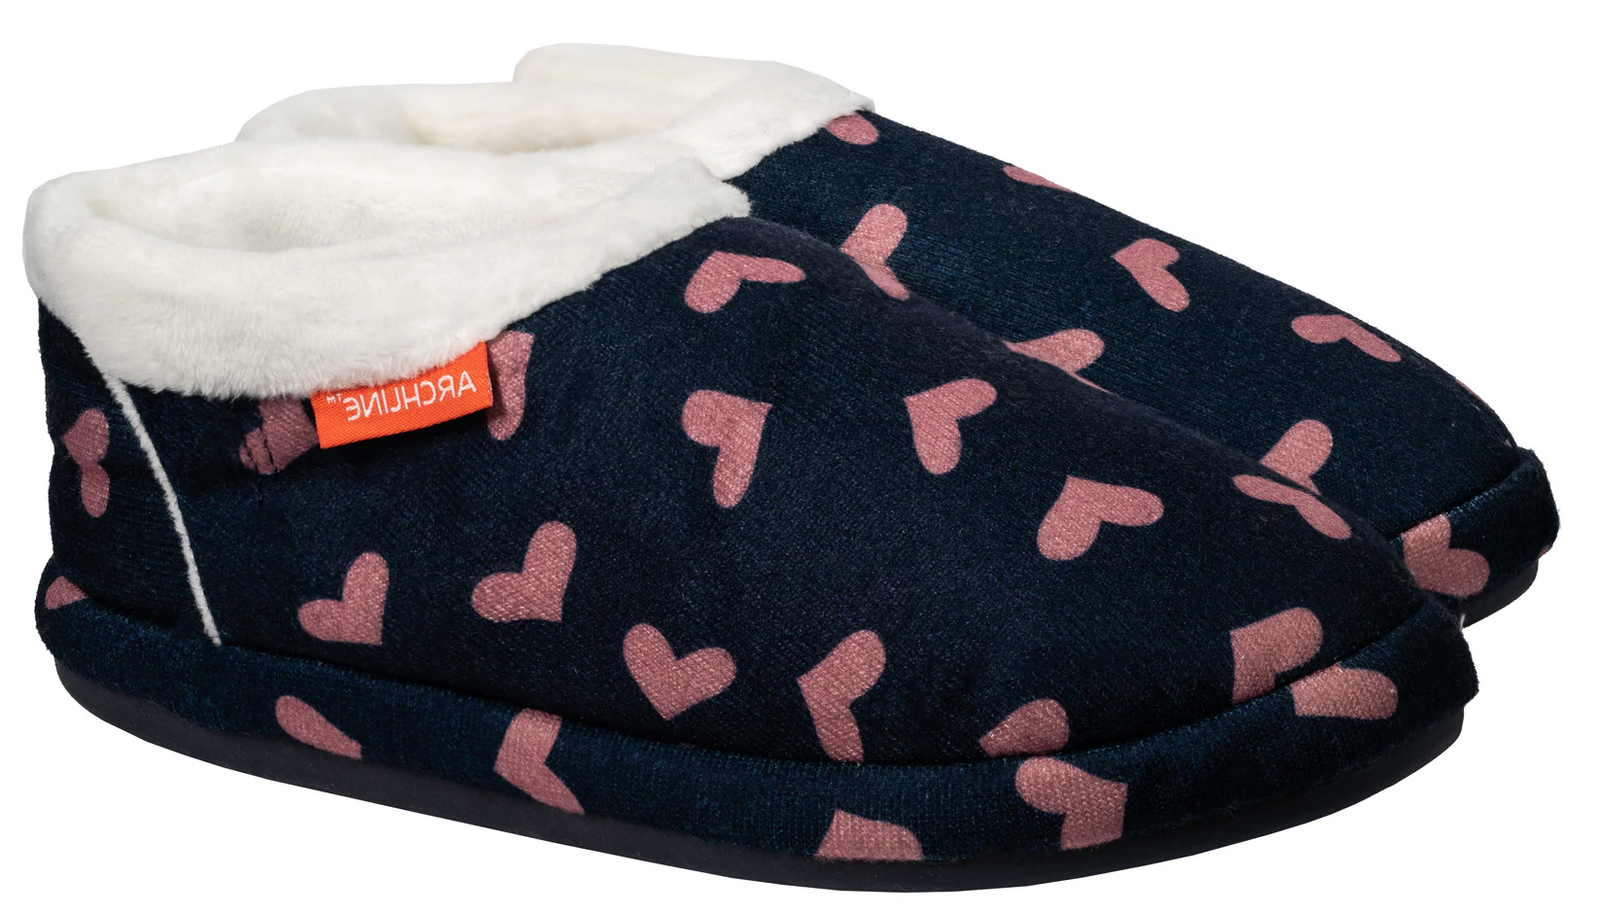 Orthotic Slippers CLOSED Arch Scuffs Moccasins Pain Relief - Navy with Hearts - EUR41